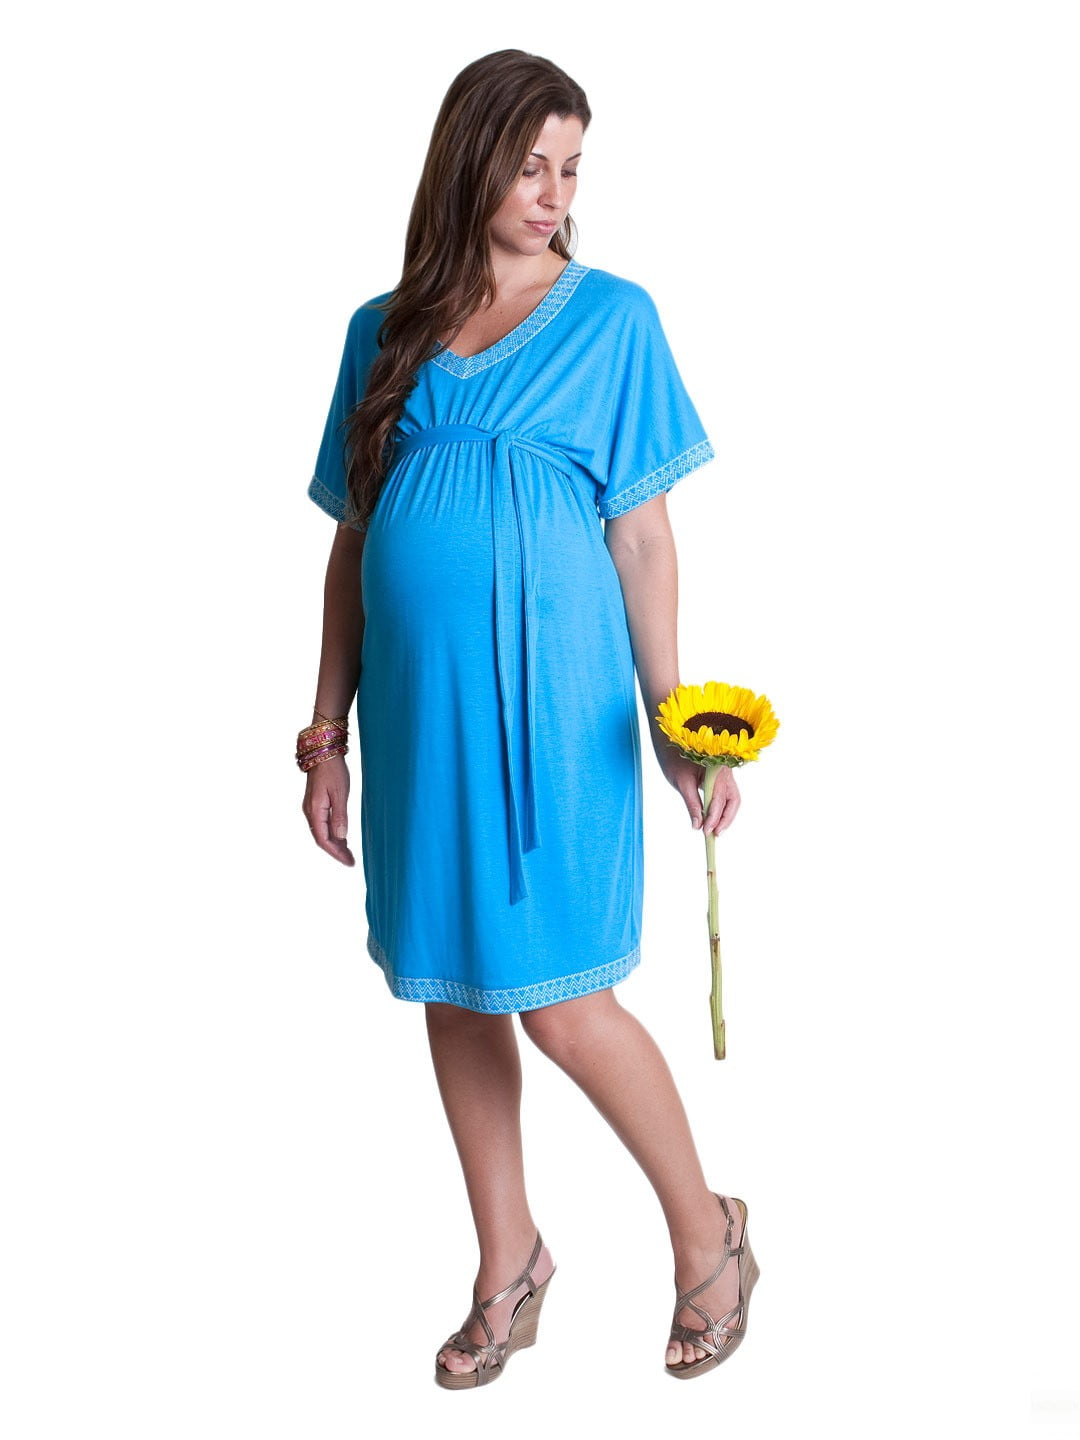 Maternity Summer Dresses For the Perfect Baby Shower